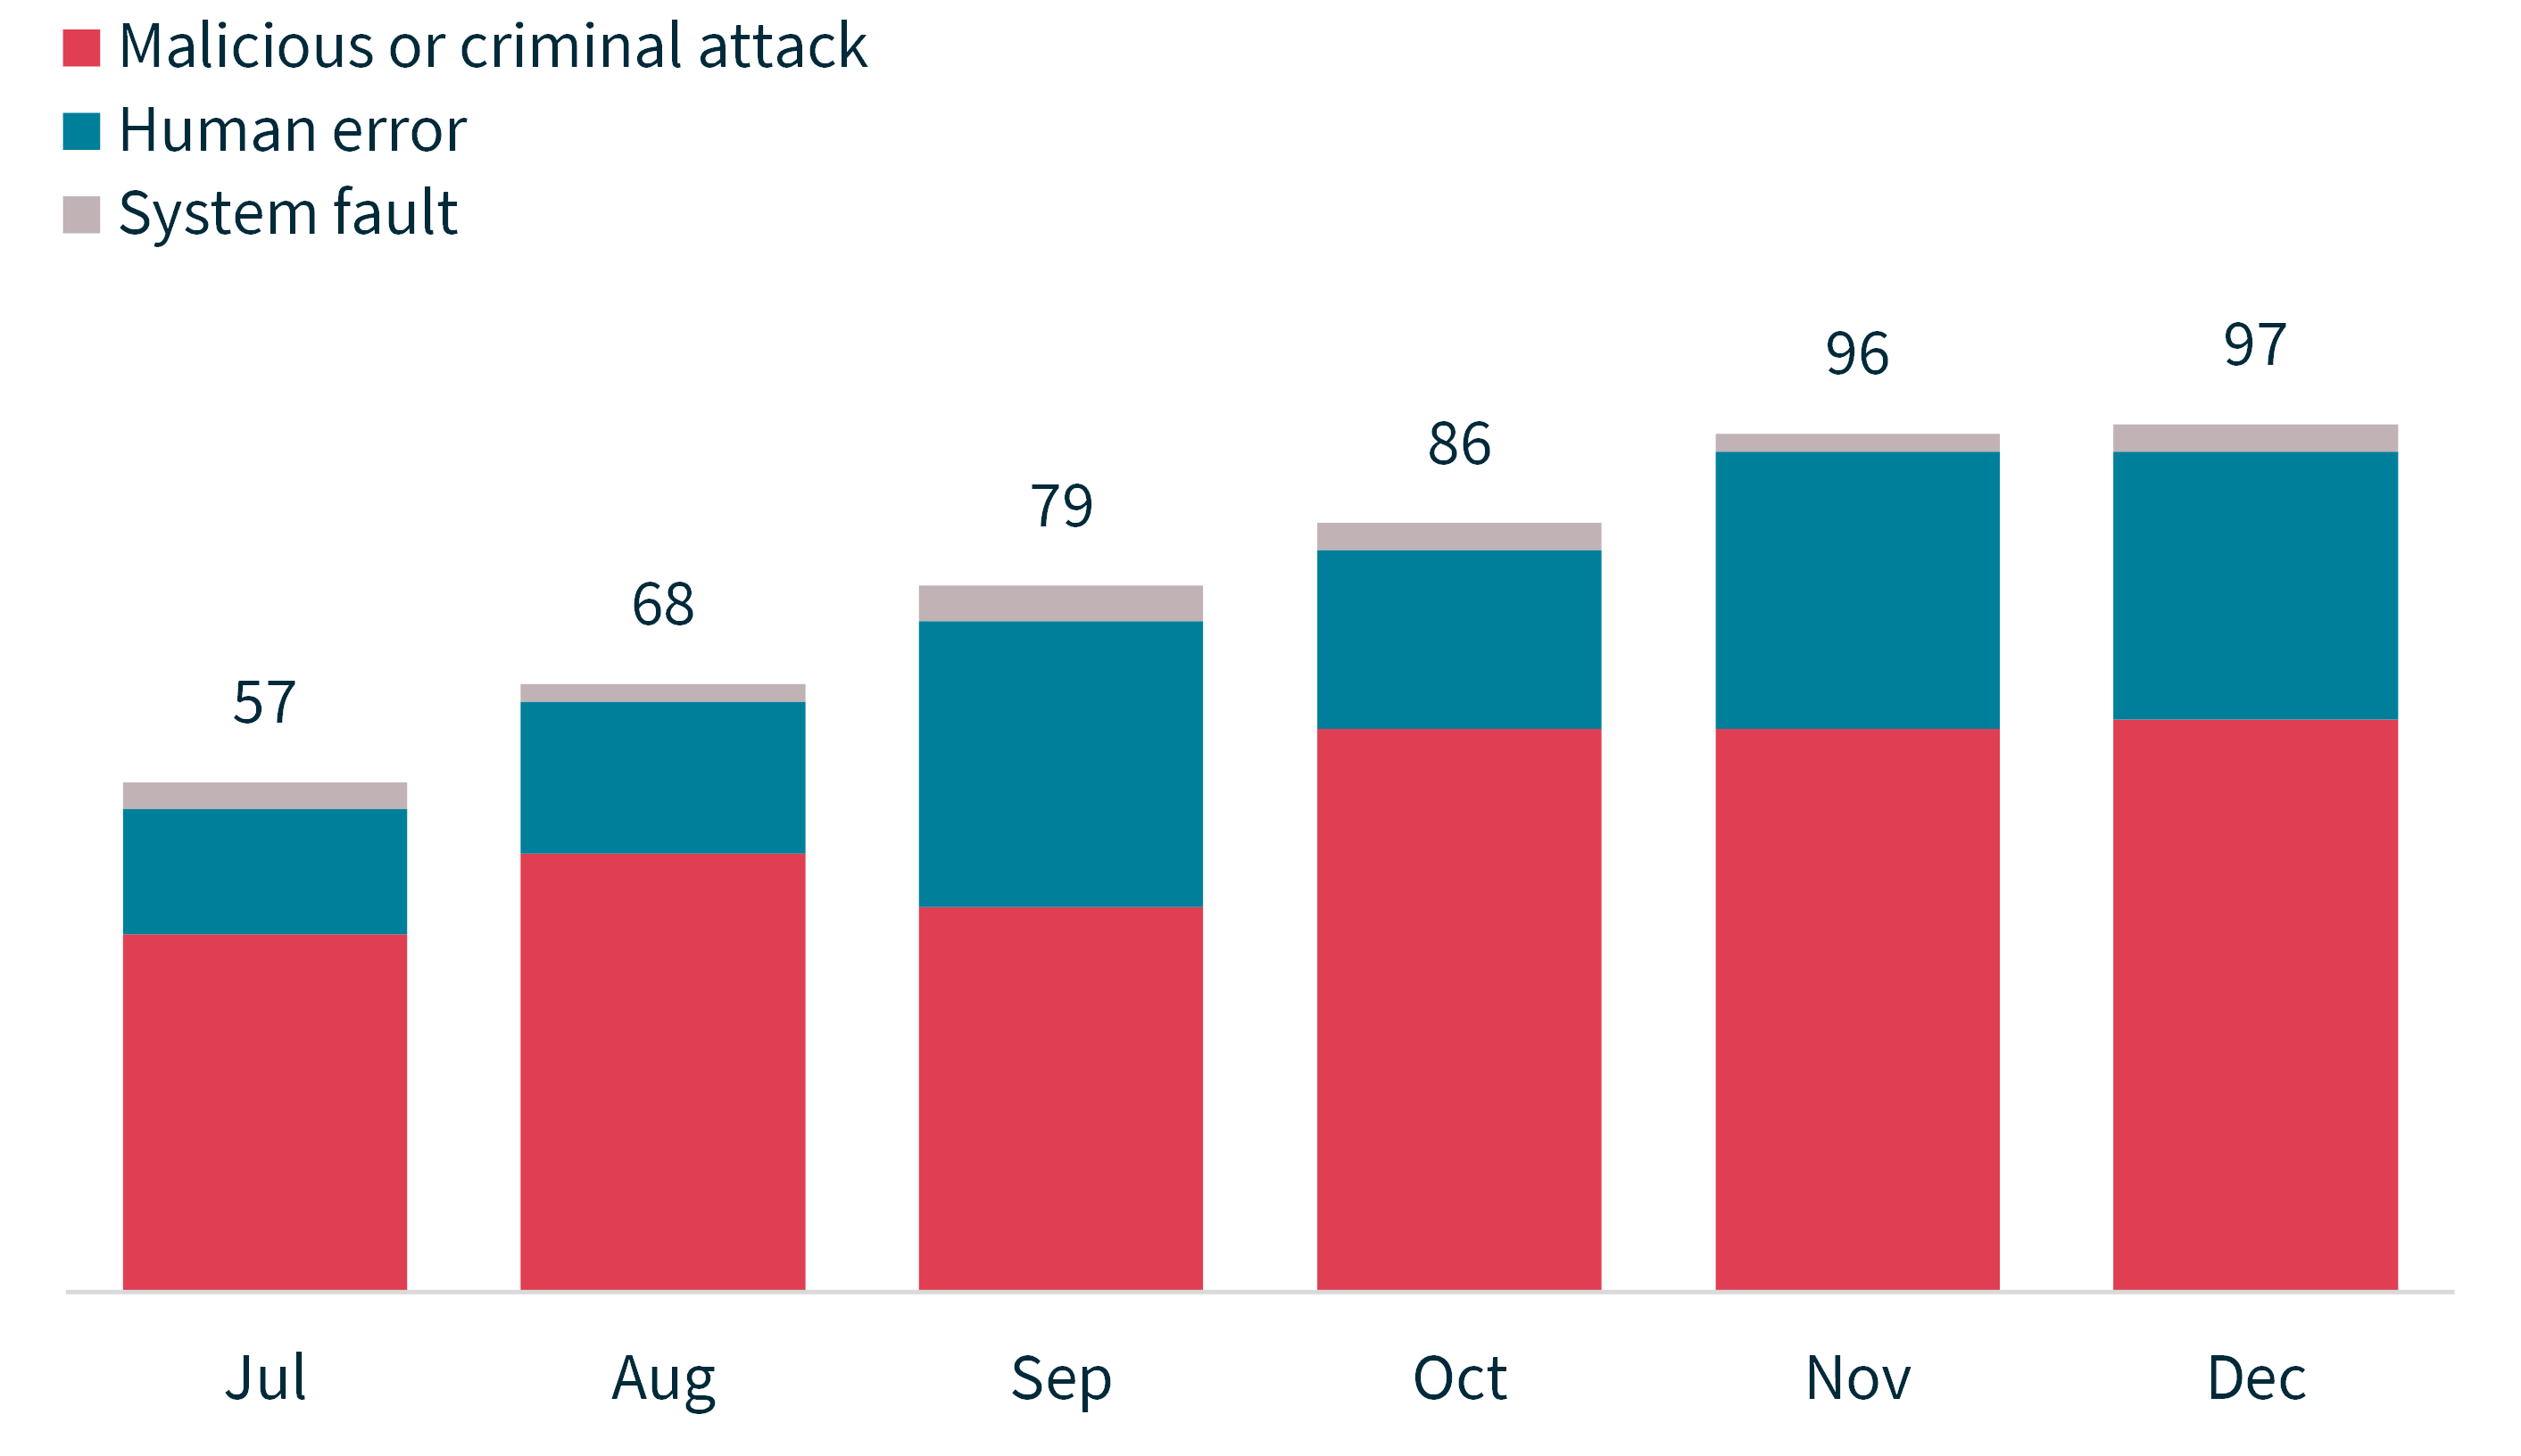 Chart 2 - Notifications received by month showing the sources of breaches